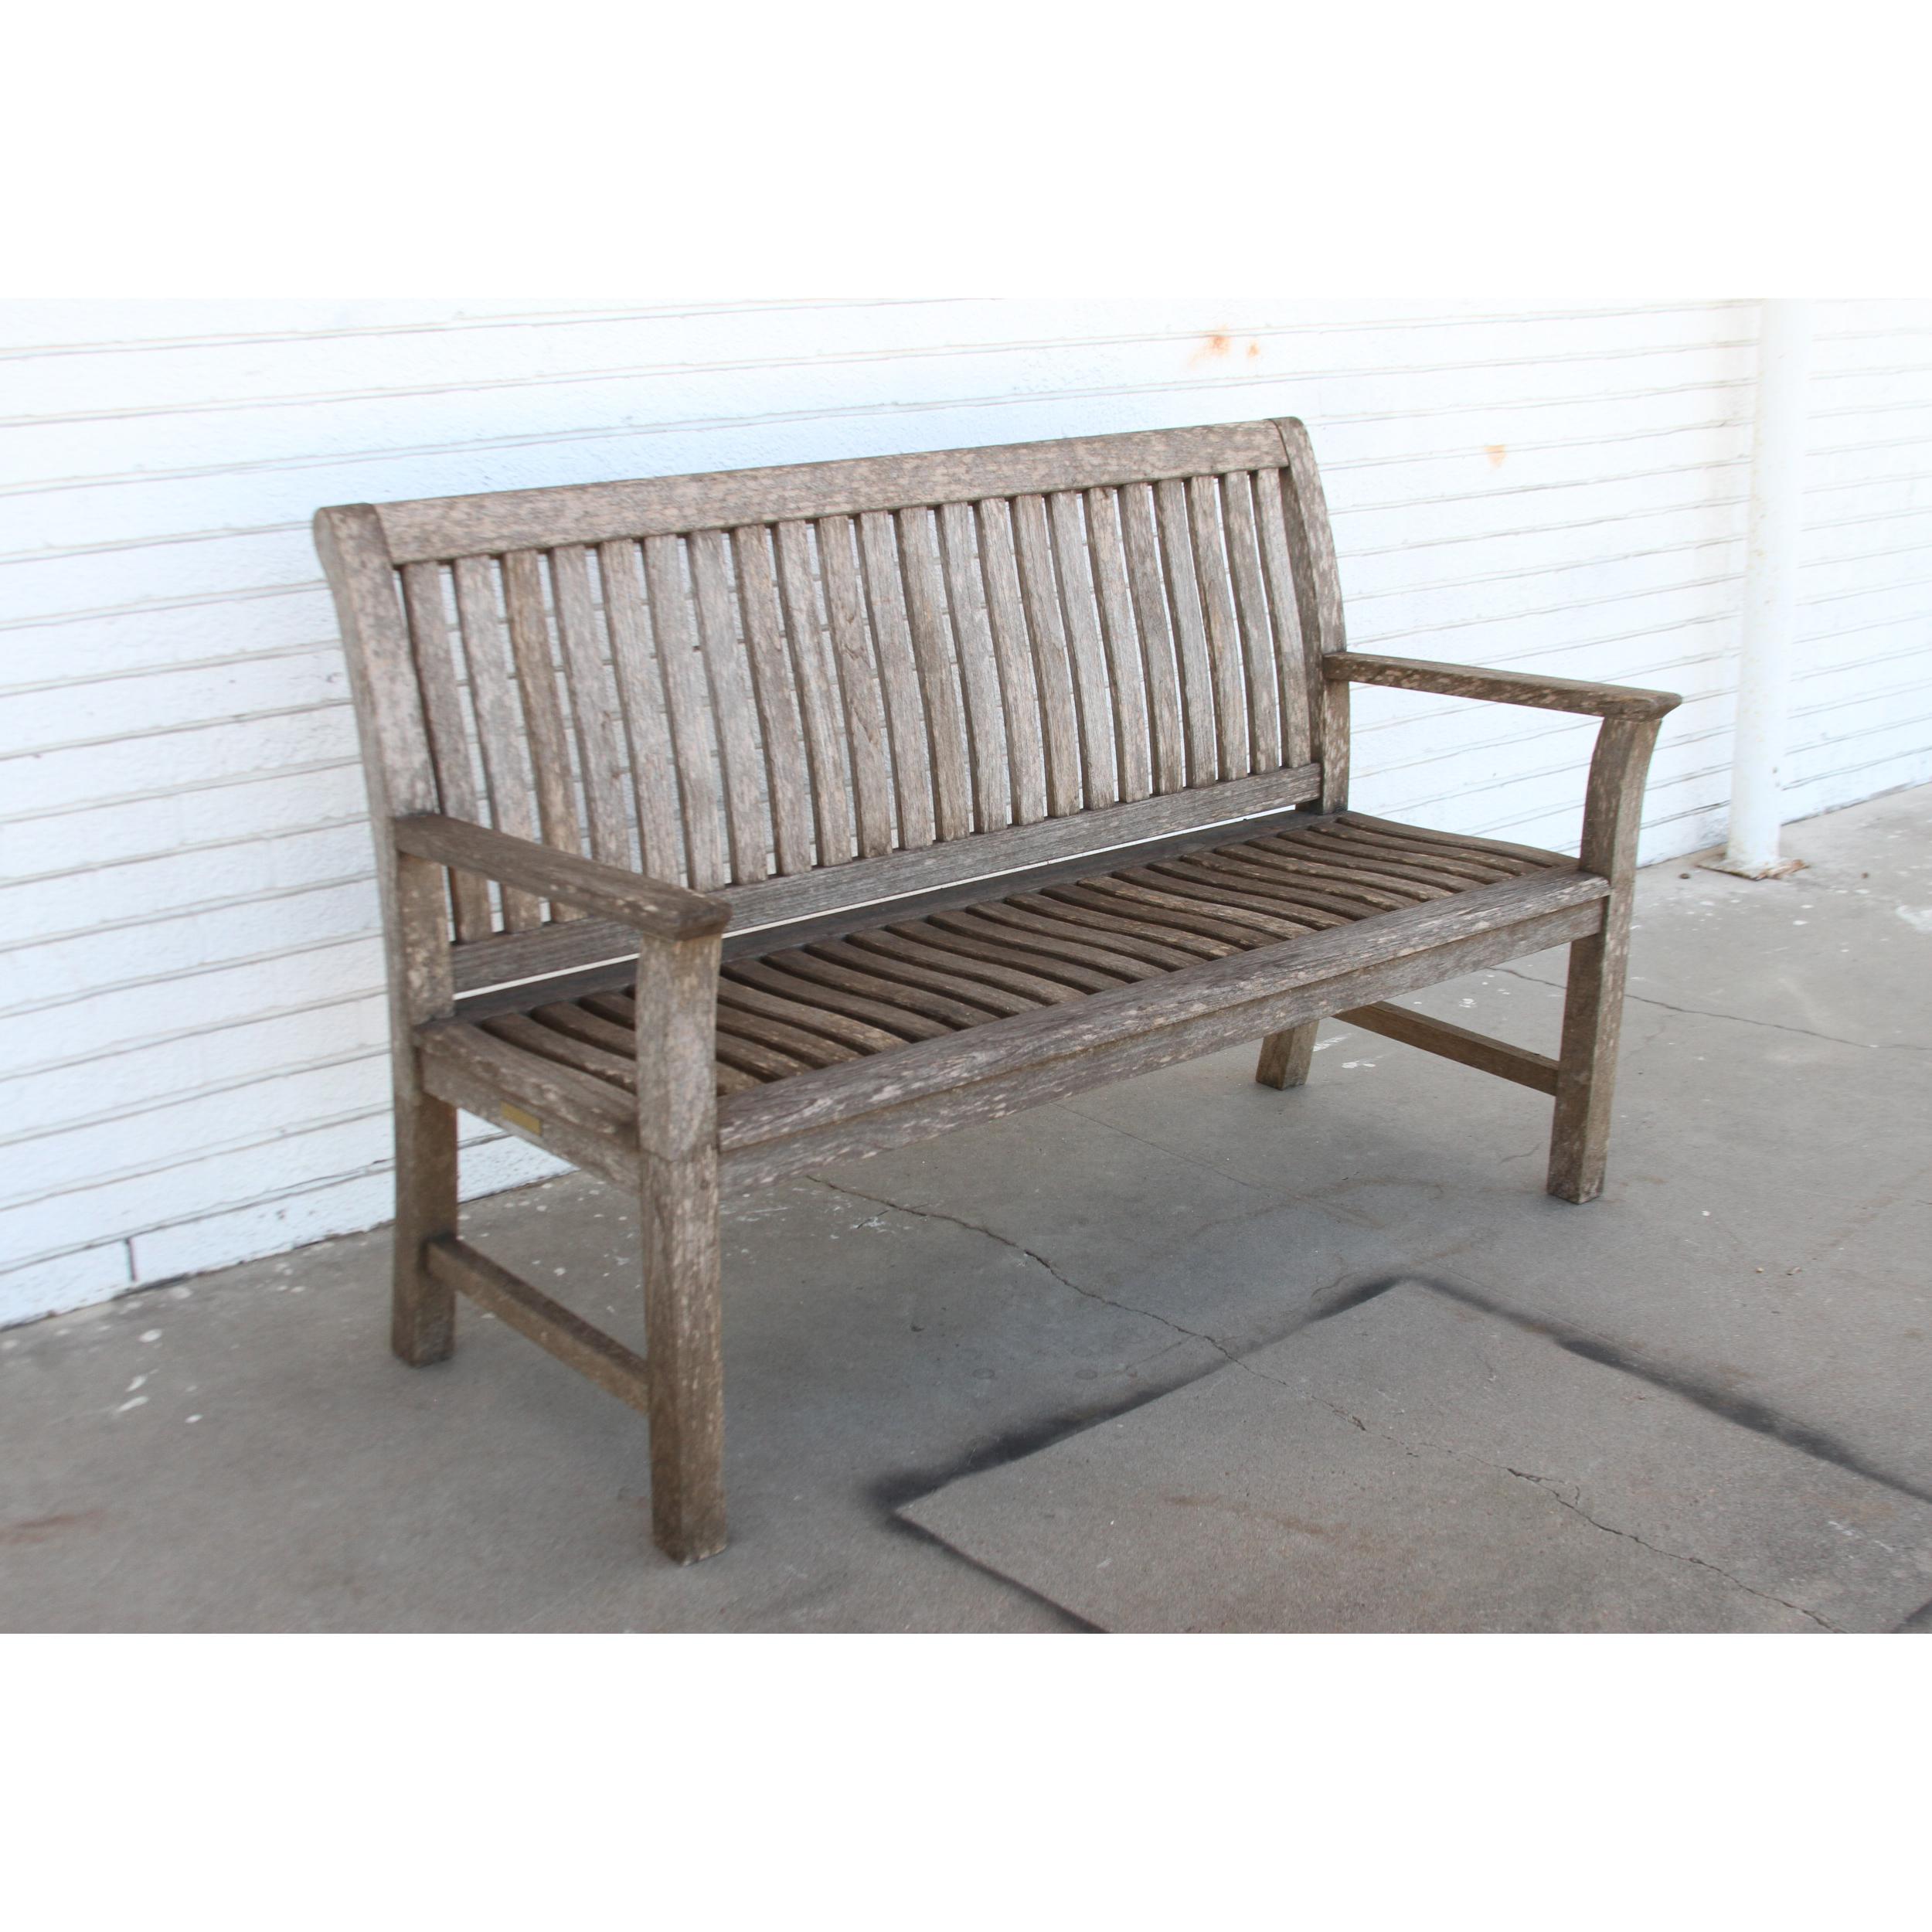 Kingsley bate bench

Heavy duty 6 ft. teak bench perfect for commercial locations
Made of top grade teak wood using mortise and tenon joinery
Perfectly suited for use in public parks, malls, office buildings or your own garden

